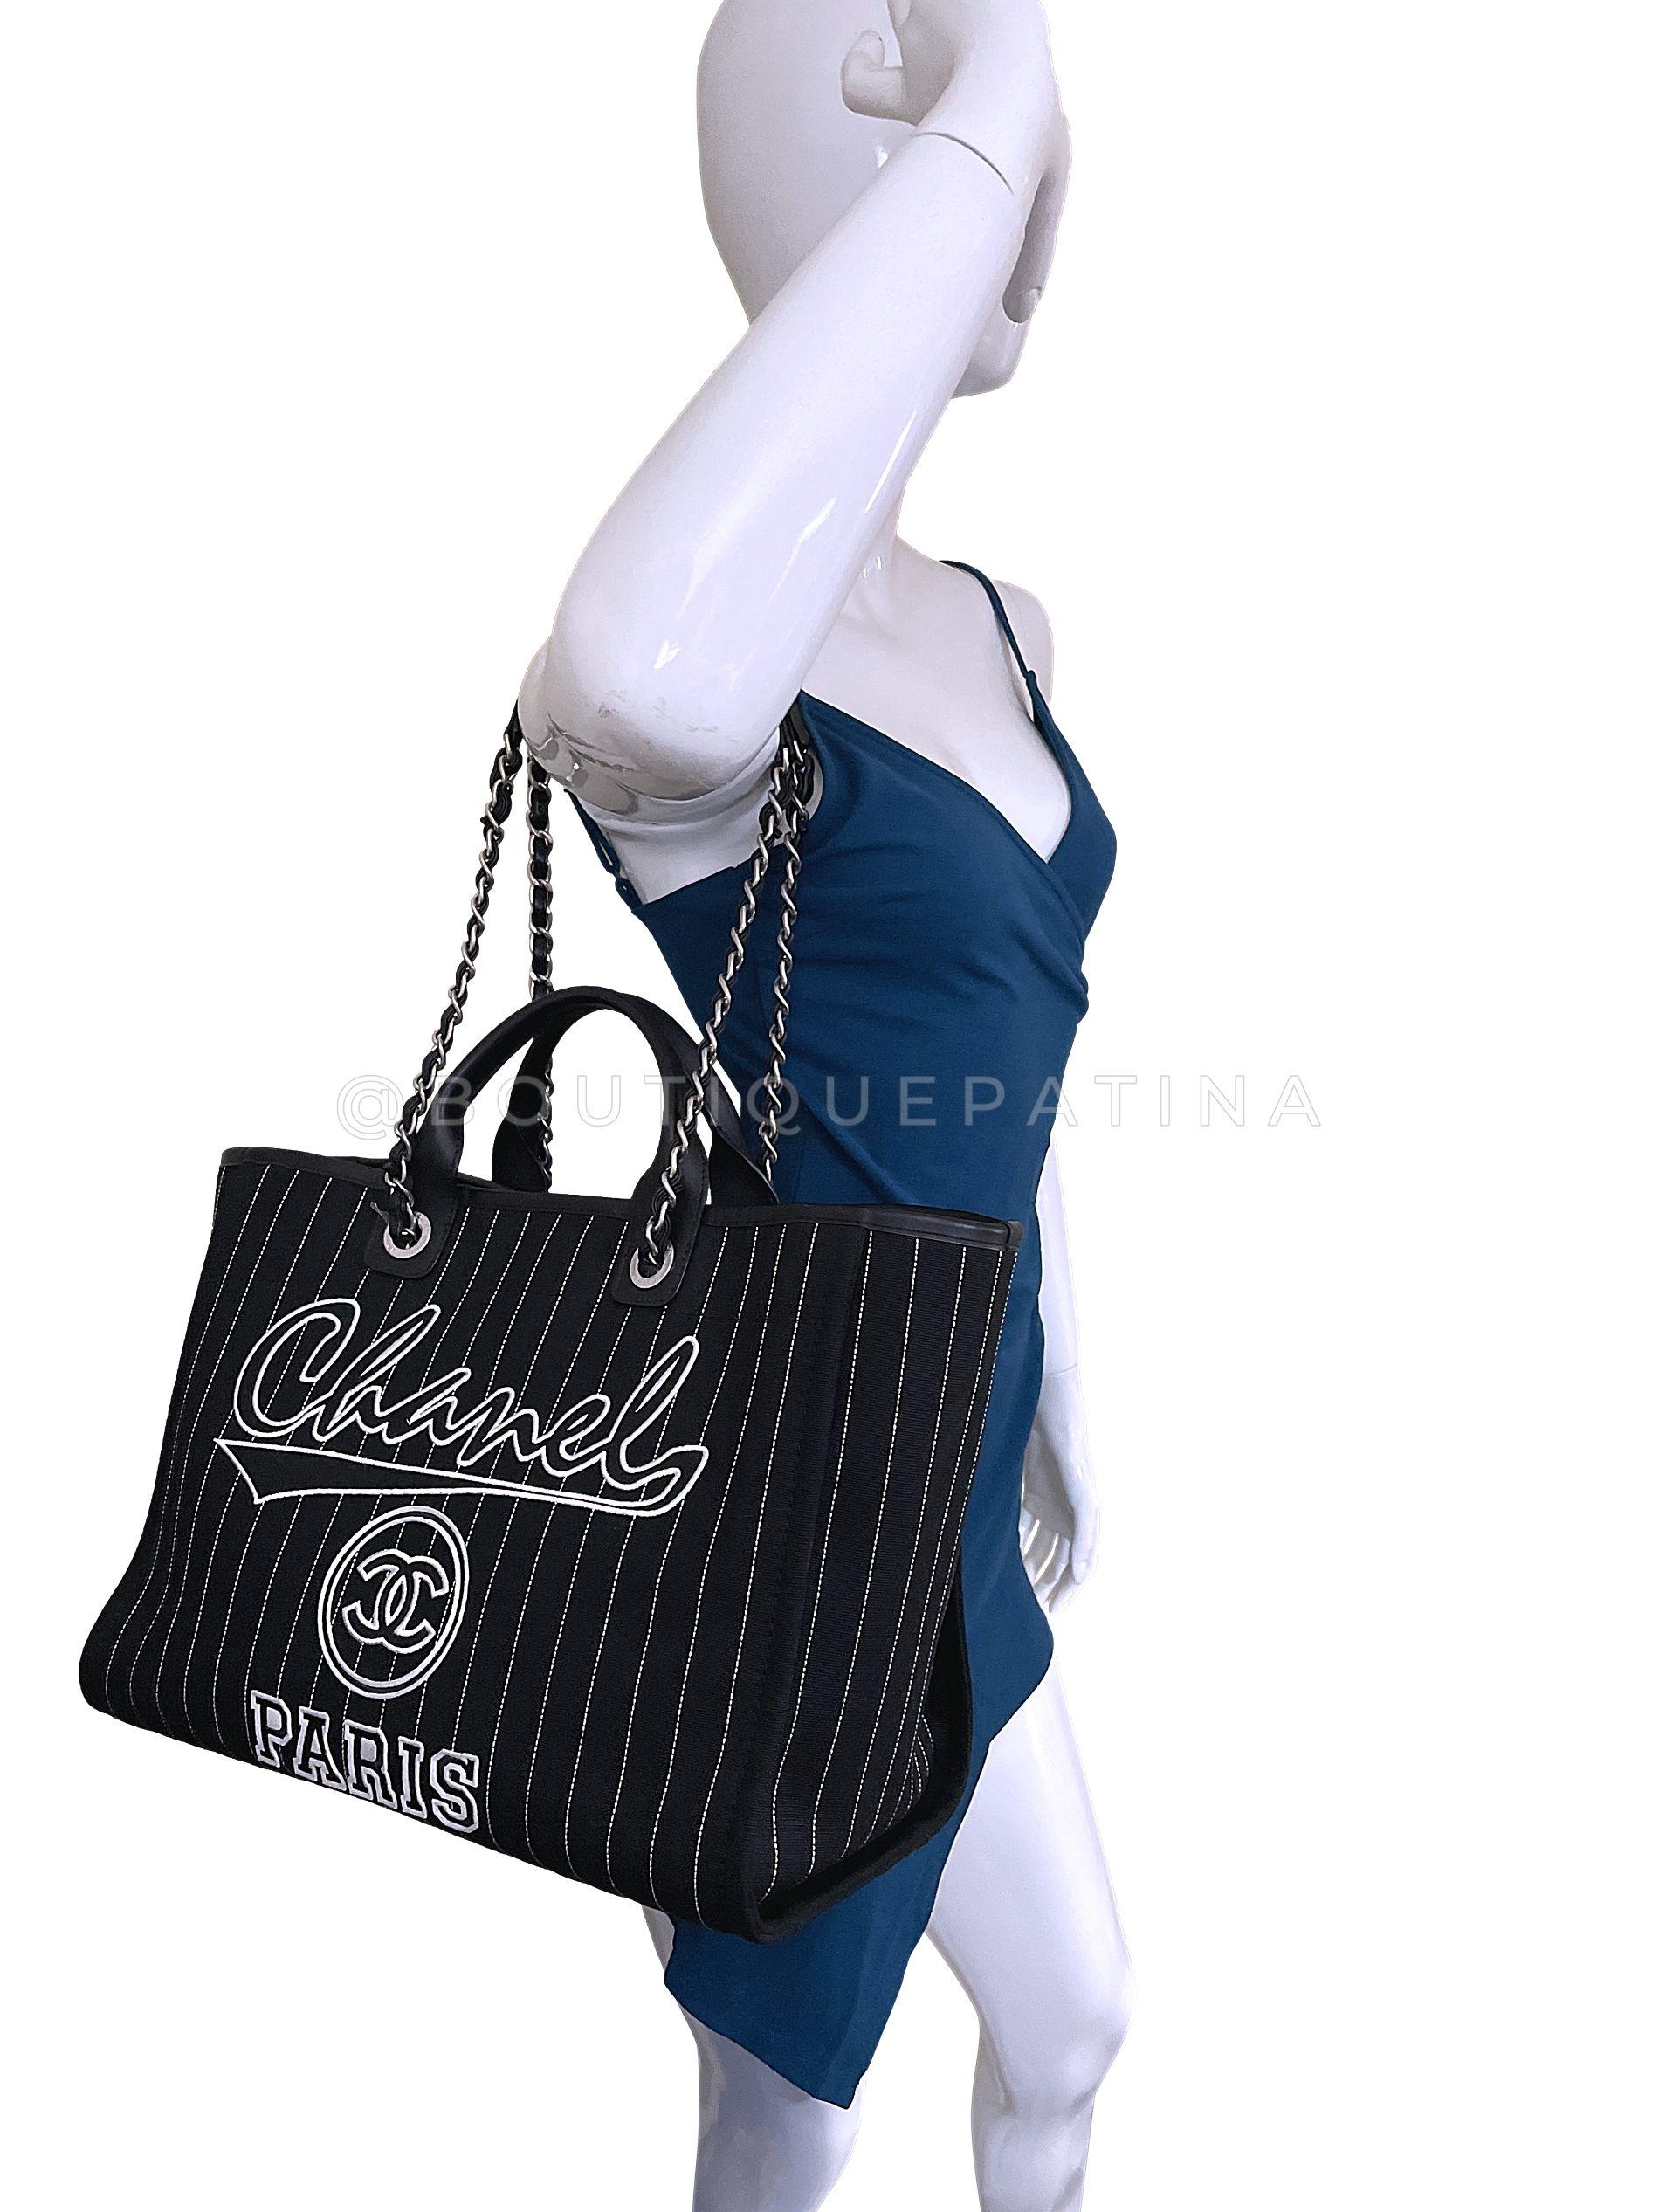 Rare Chanel Baseball Jersey Large Deauville Tote Bag 67968 For Sale 14